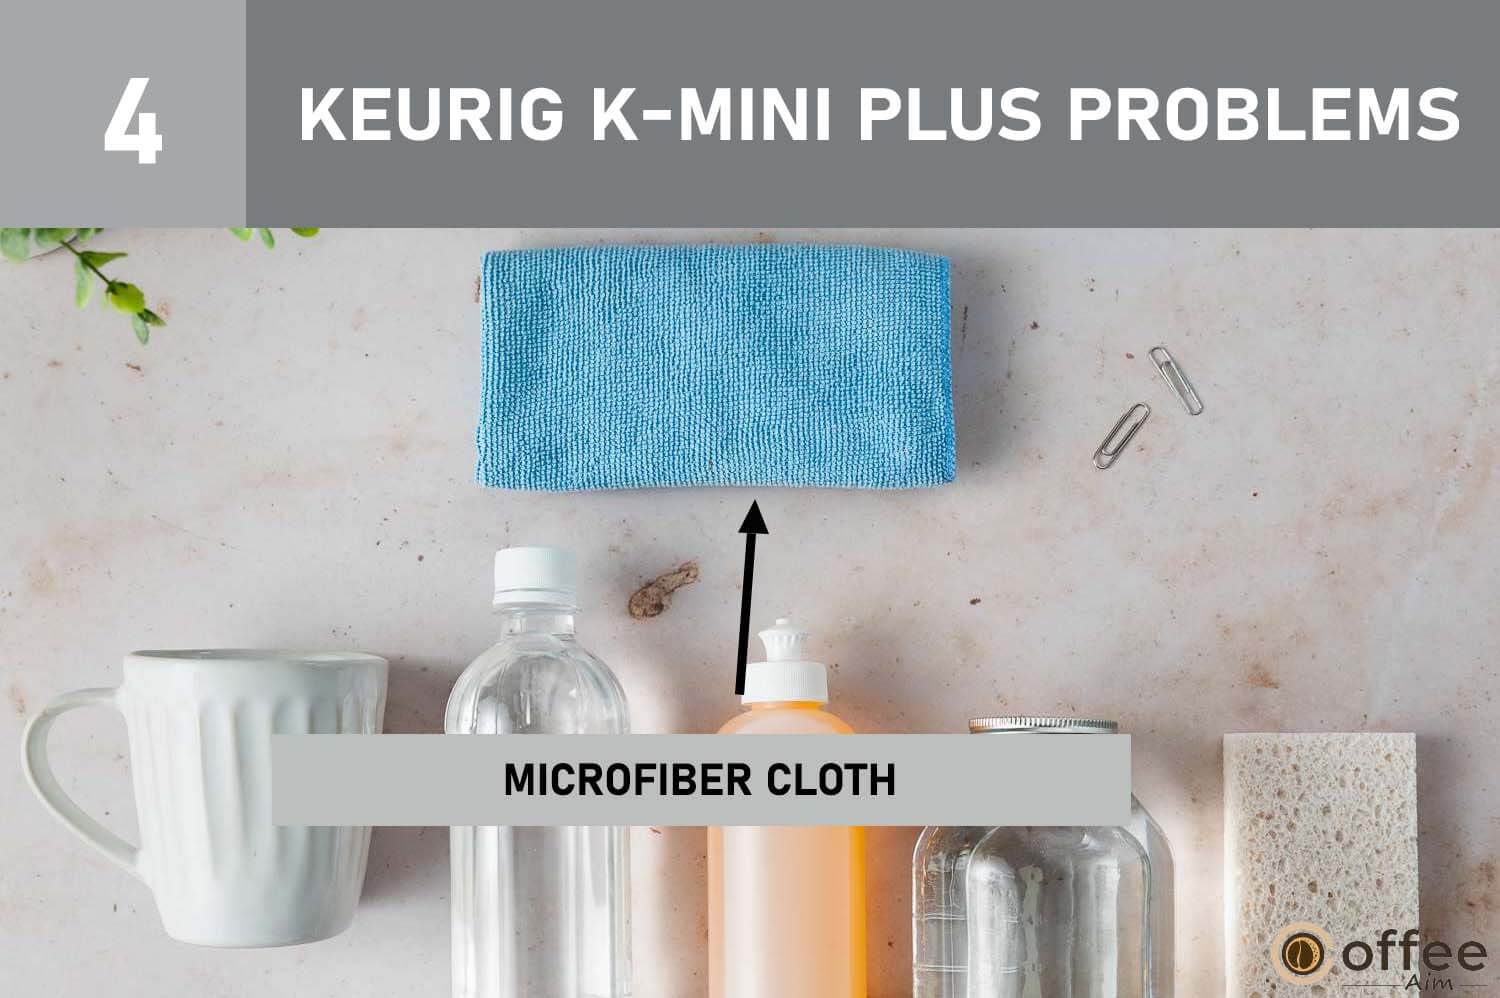 This image showcases the "Microfiber Cloth" as part of our article on addressing common issues with the Keurig K-Mini Plus.